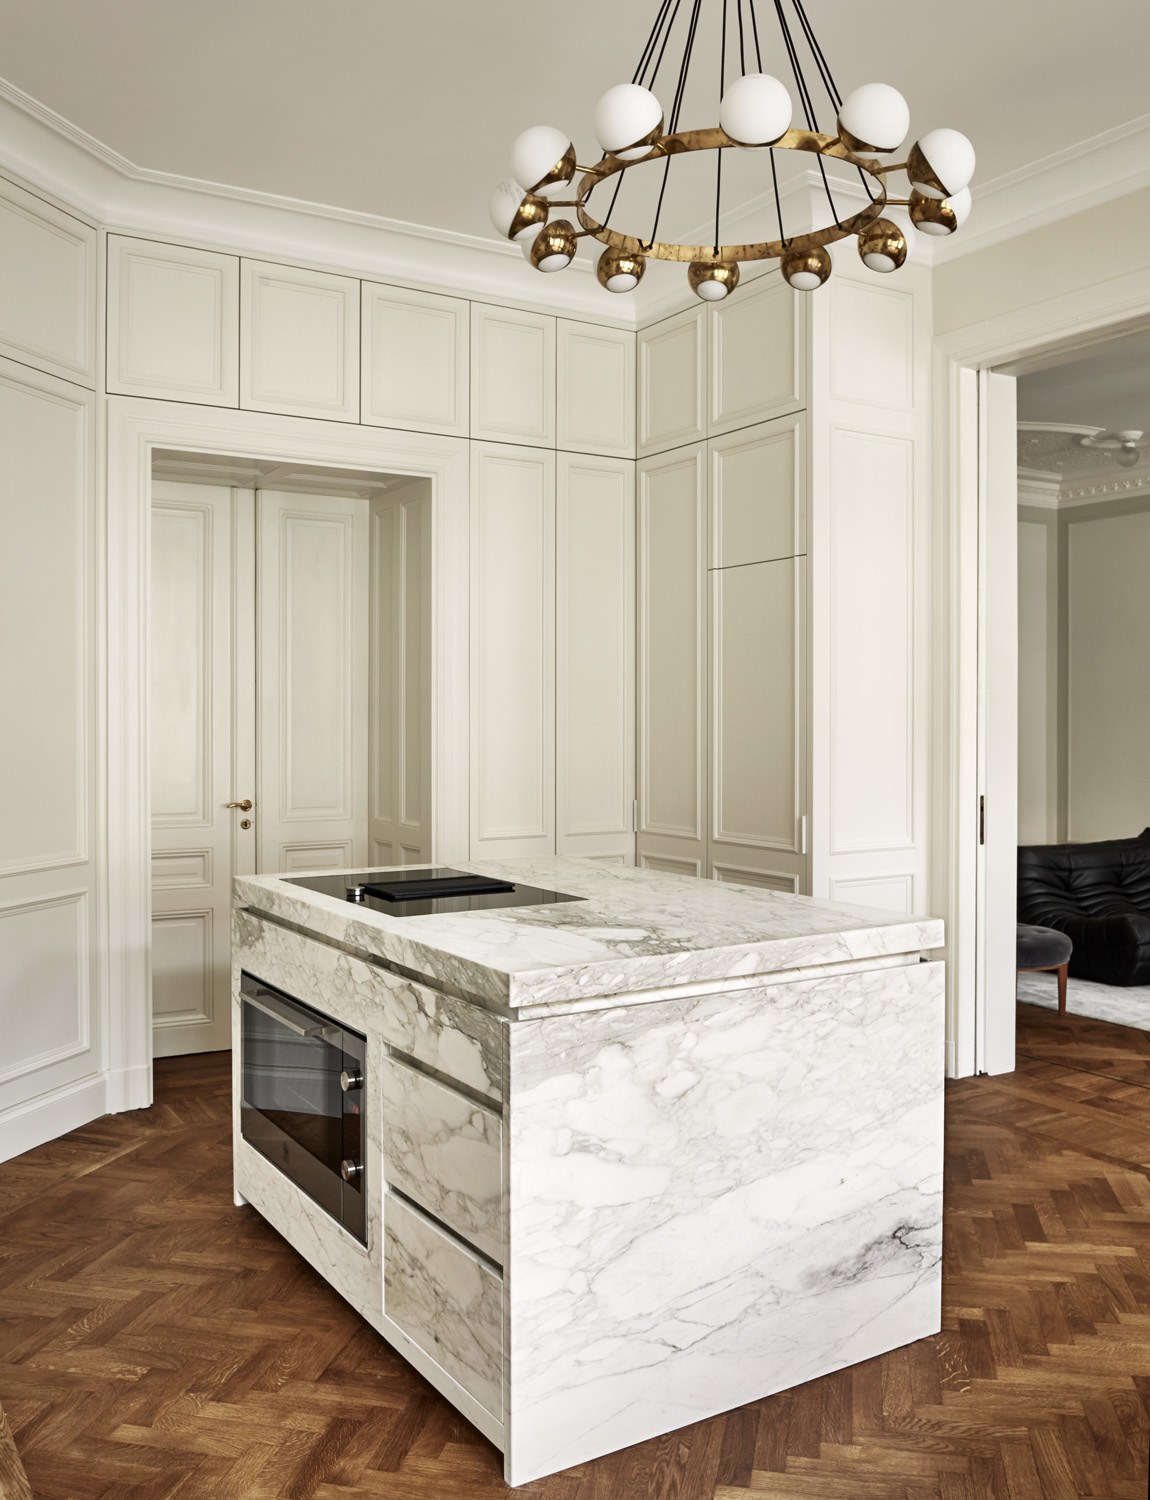 Dreamy Neutral Apartment_Joanna_Laven Marble Kitchen High Ceilings